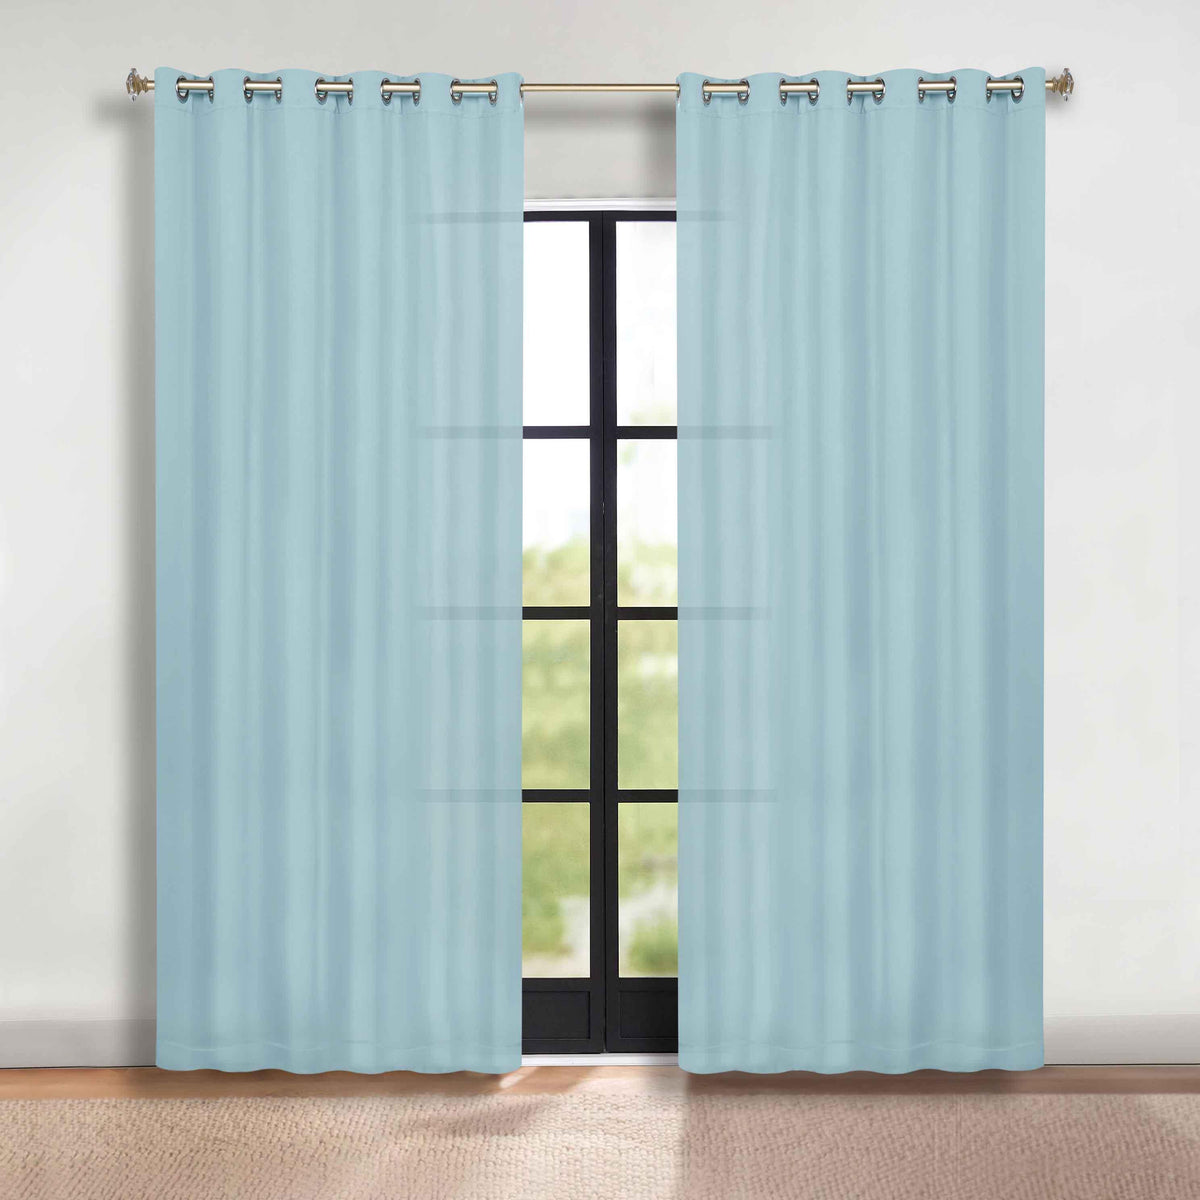 Solid Room Darkening Blackout Curtain Panels, Grommets, Set of 2 - Blackout Curtains by Superior - Superior 